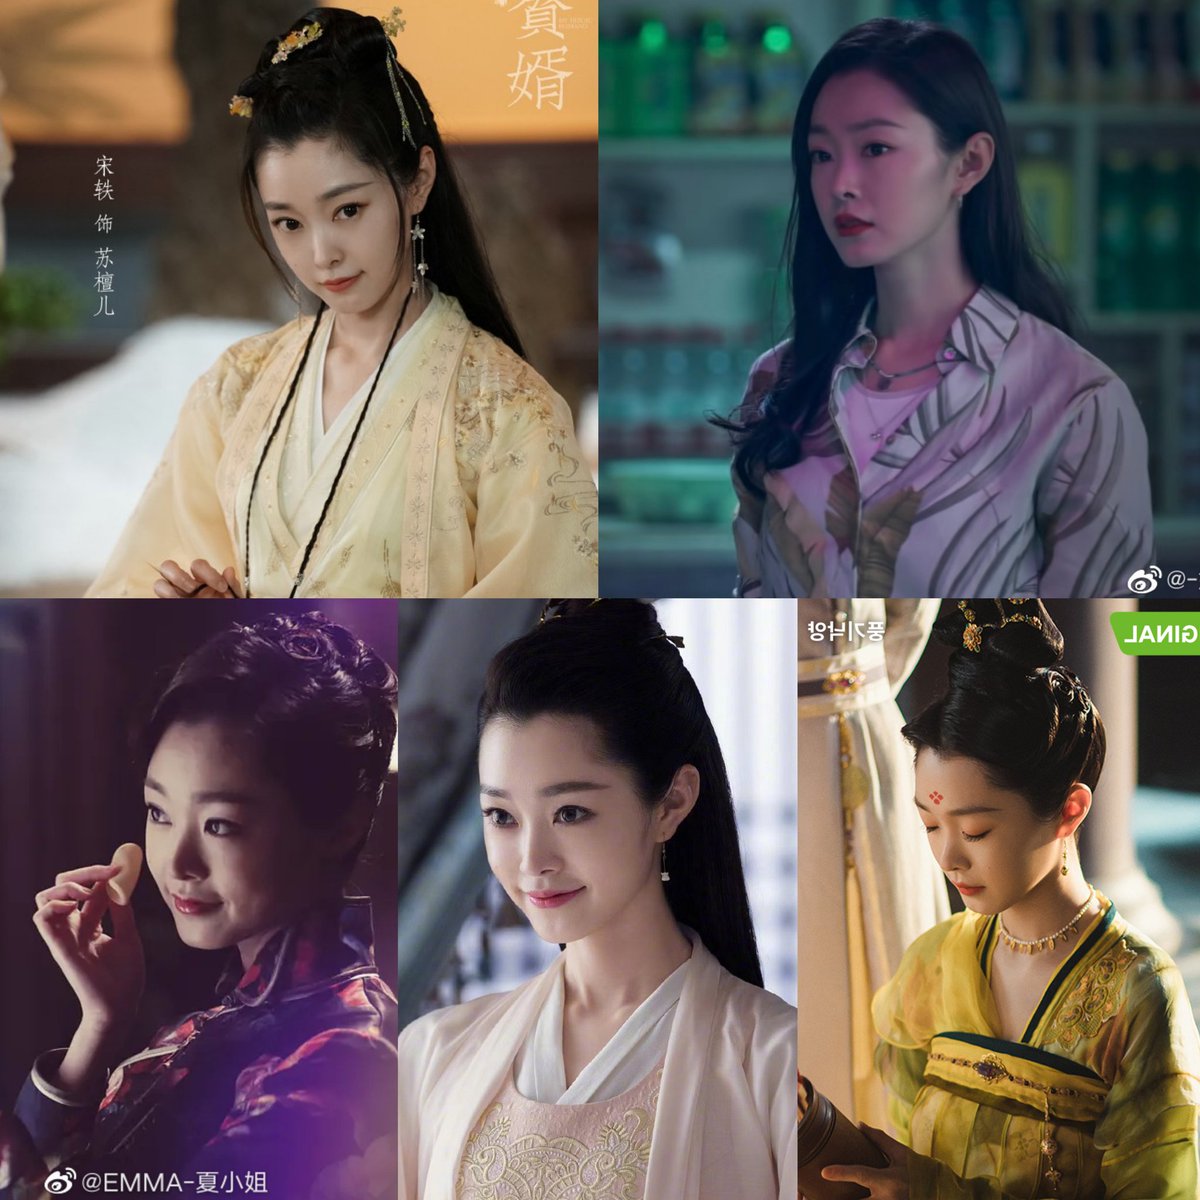 Hello👋
This is a new account dedicated to providing updates,photos and archives for #SongYi #宋轶 #ซ่งอี้ 

Whom you may have seen or watched in #MyHeroicHusband,#DayBreaker, #TheDisguiser,#JoyOfLife #Luoyang  &  more!

Please help to spread the word and support,thank you 💚🫶🏾